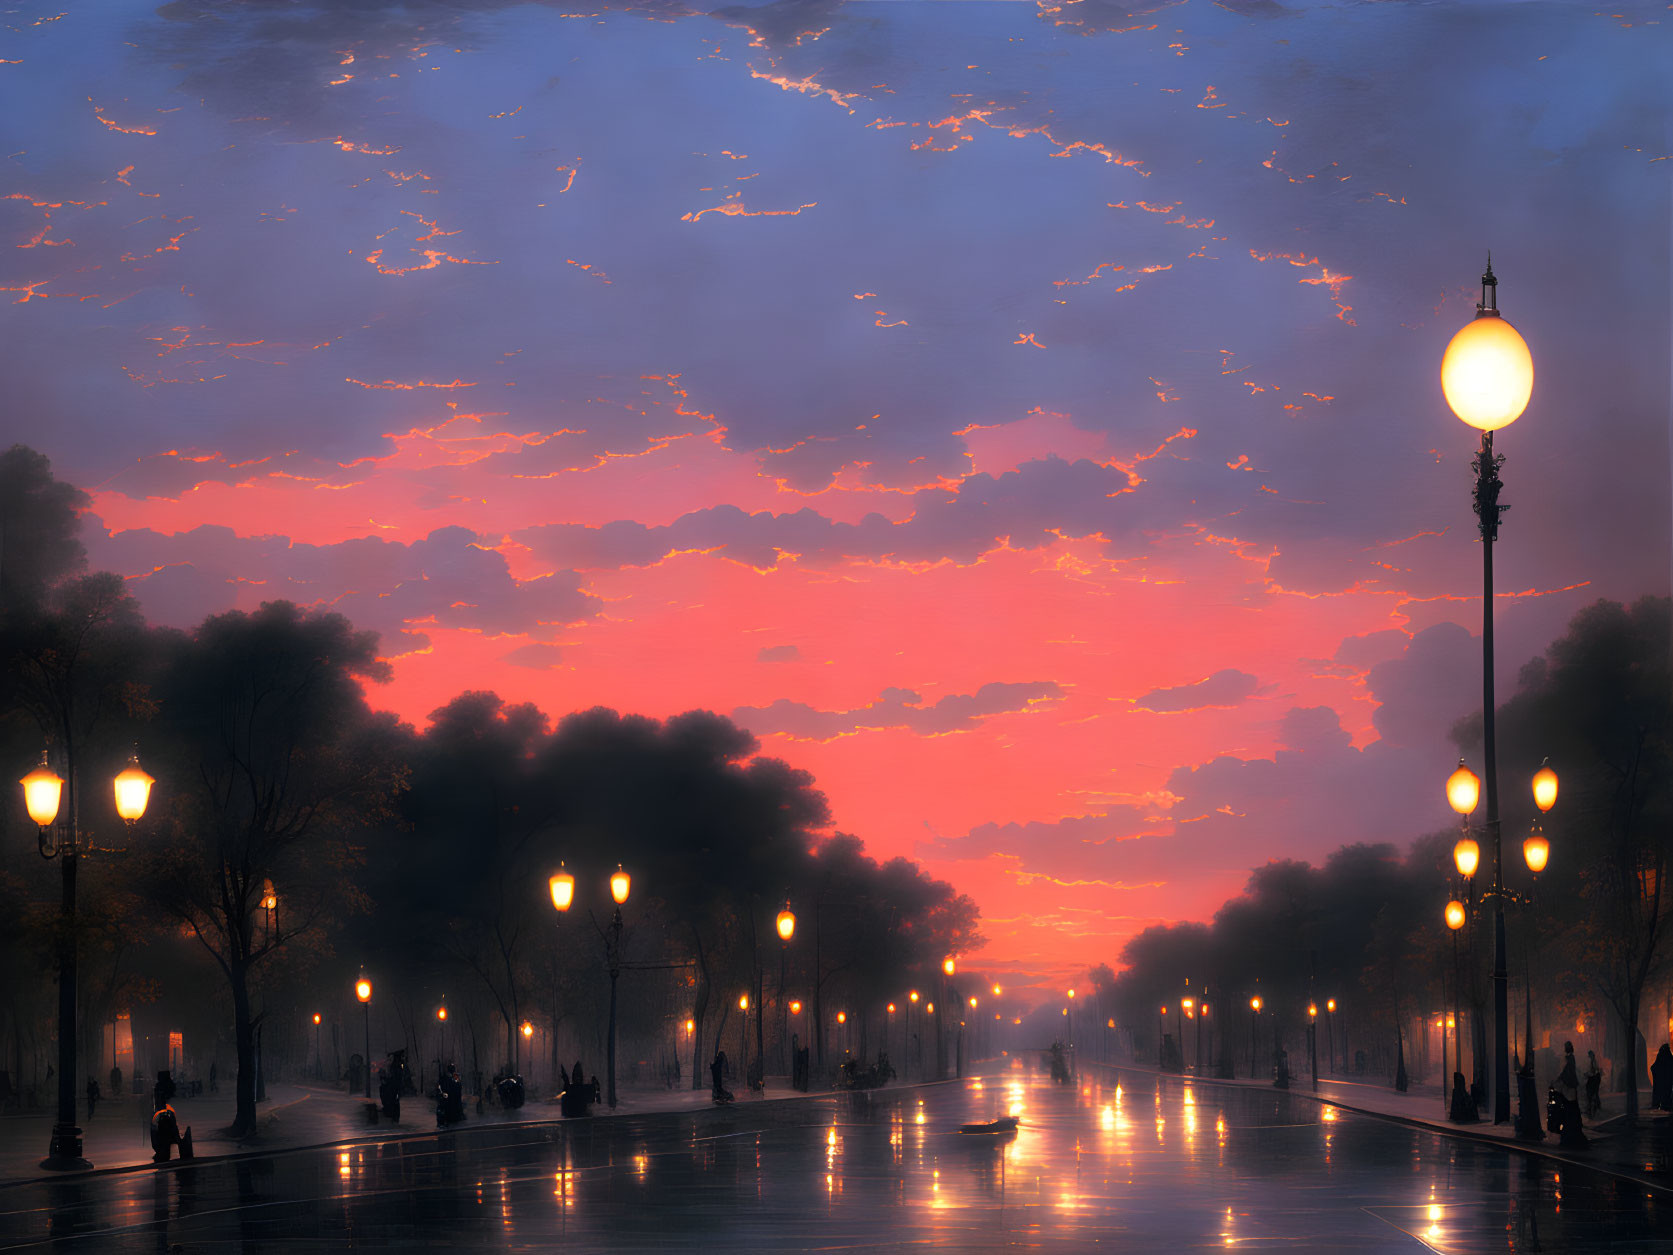 Romantic evening scene with glowing streetlights on a promenade at dusk